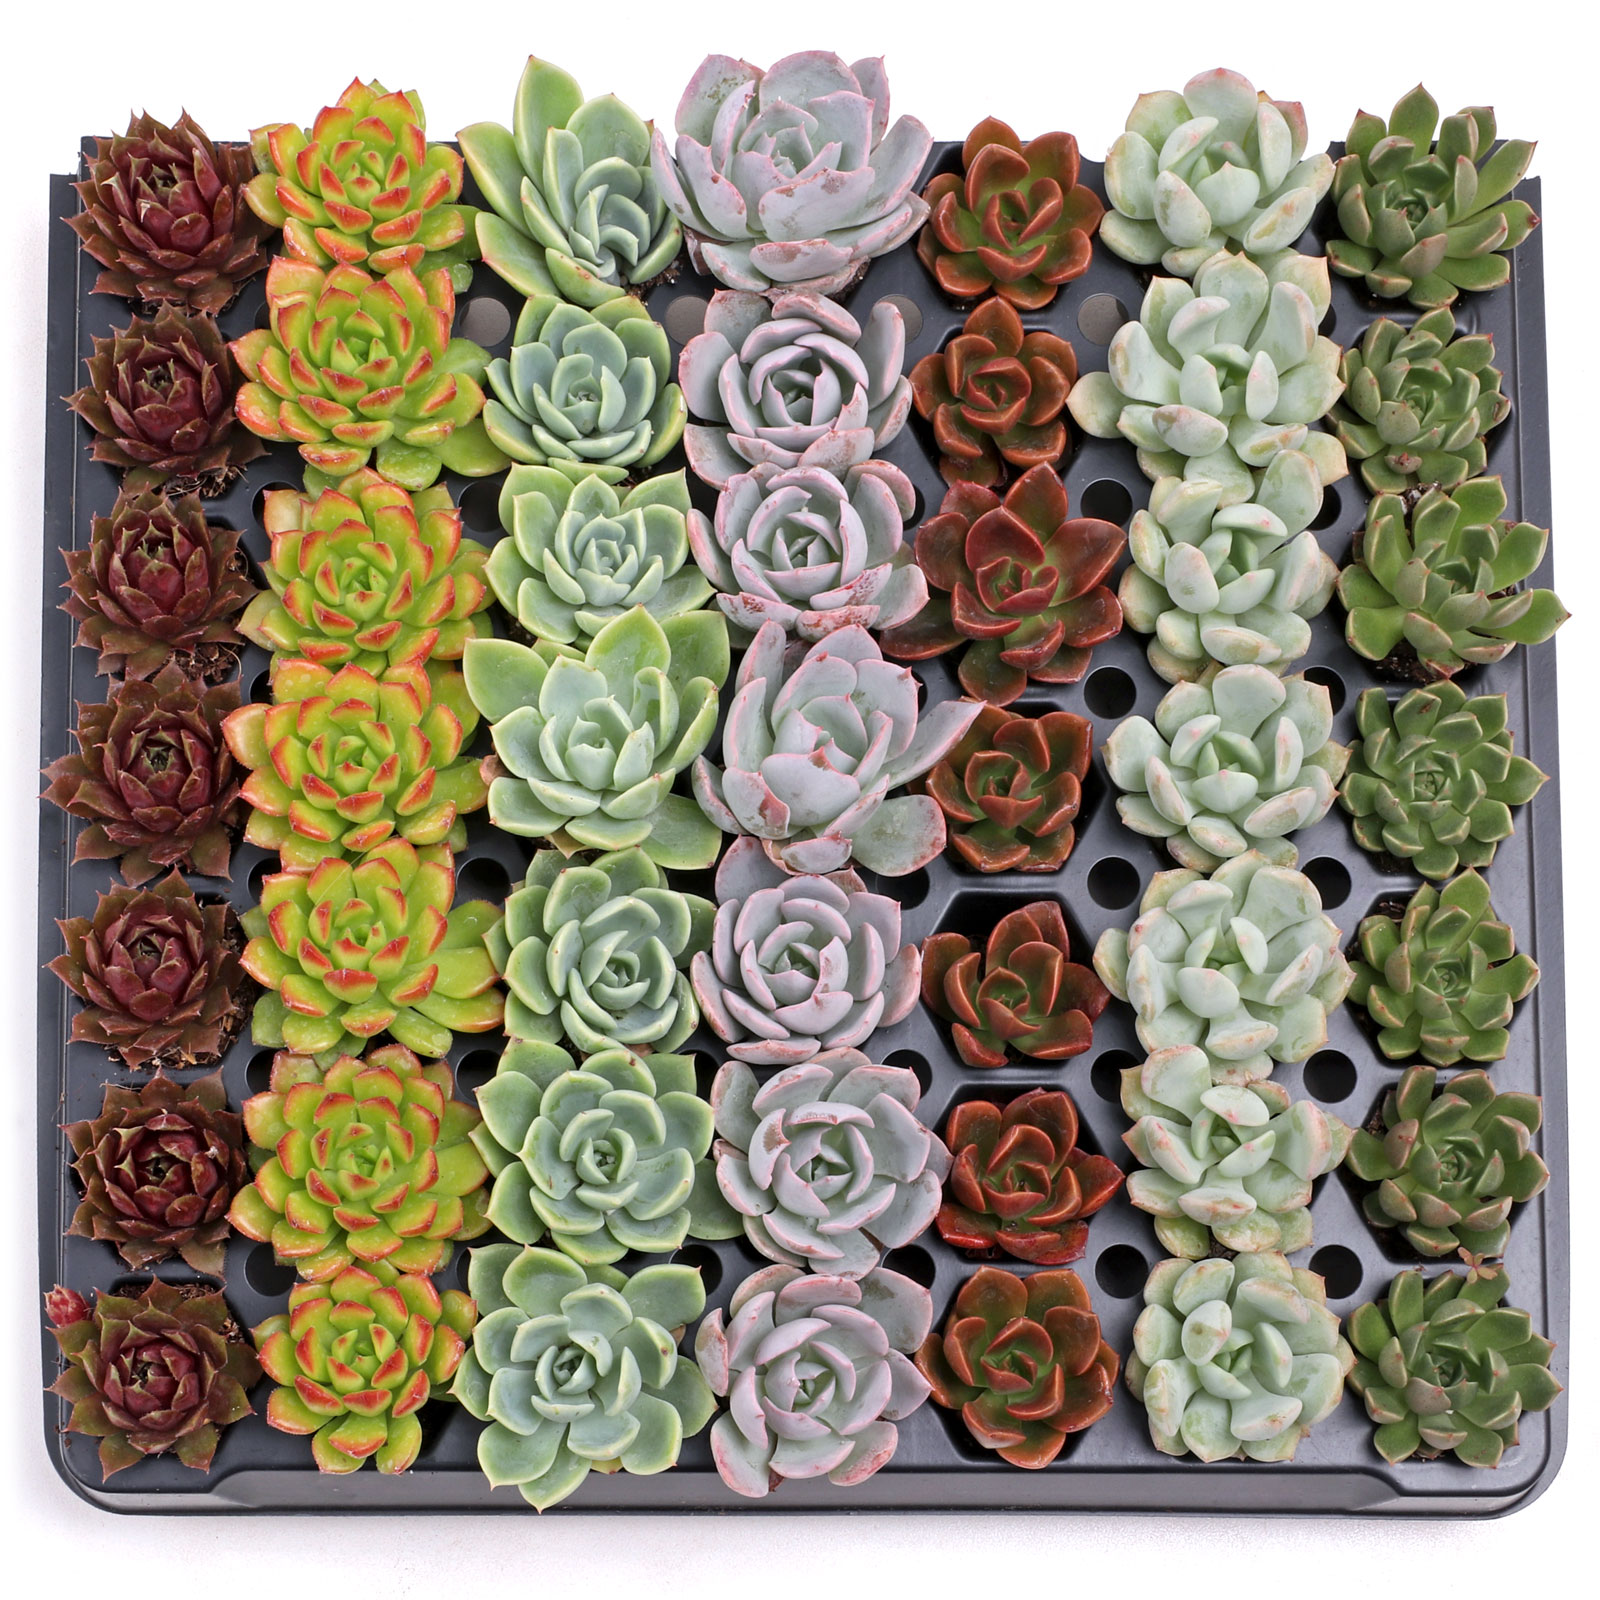 What succulents are featured in the first photo above?